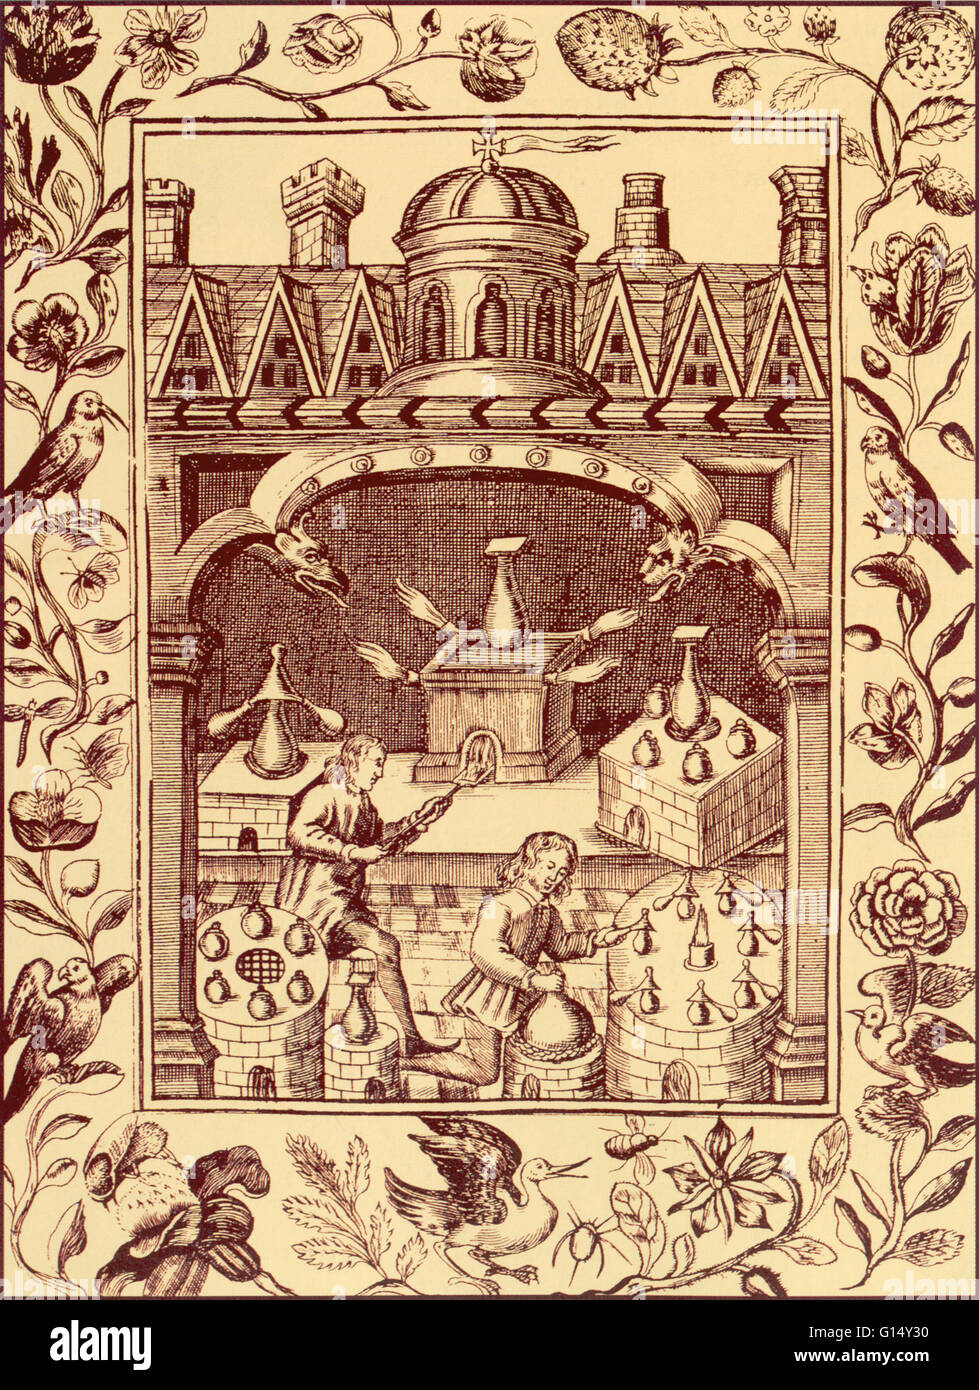 An illustration of various alcemical ovens. Alchemy was the pseudo-scientific predecessor of chemistry. Among other pursuits, alchemists searched for formulas that would turn base metals into gold. Stock Photo